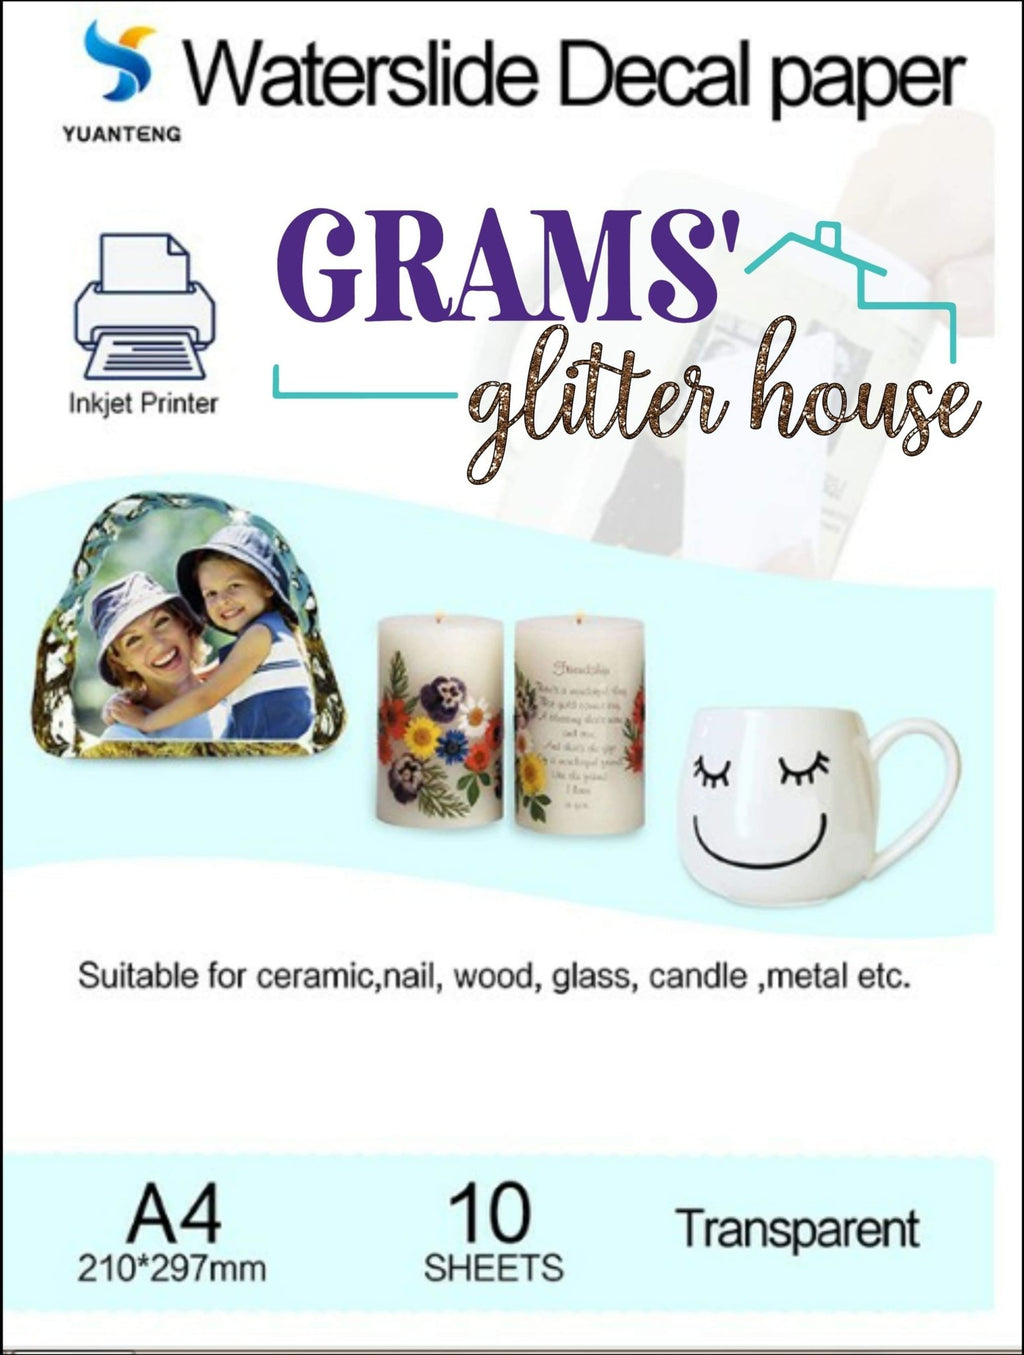 Clear Grams' Glitter House Ink Jet Printer Waterslide Decal Paper Supplies